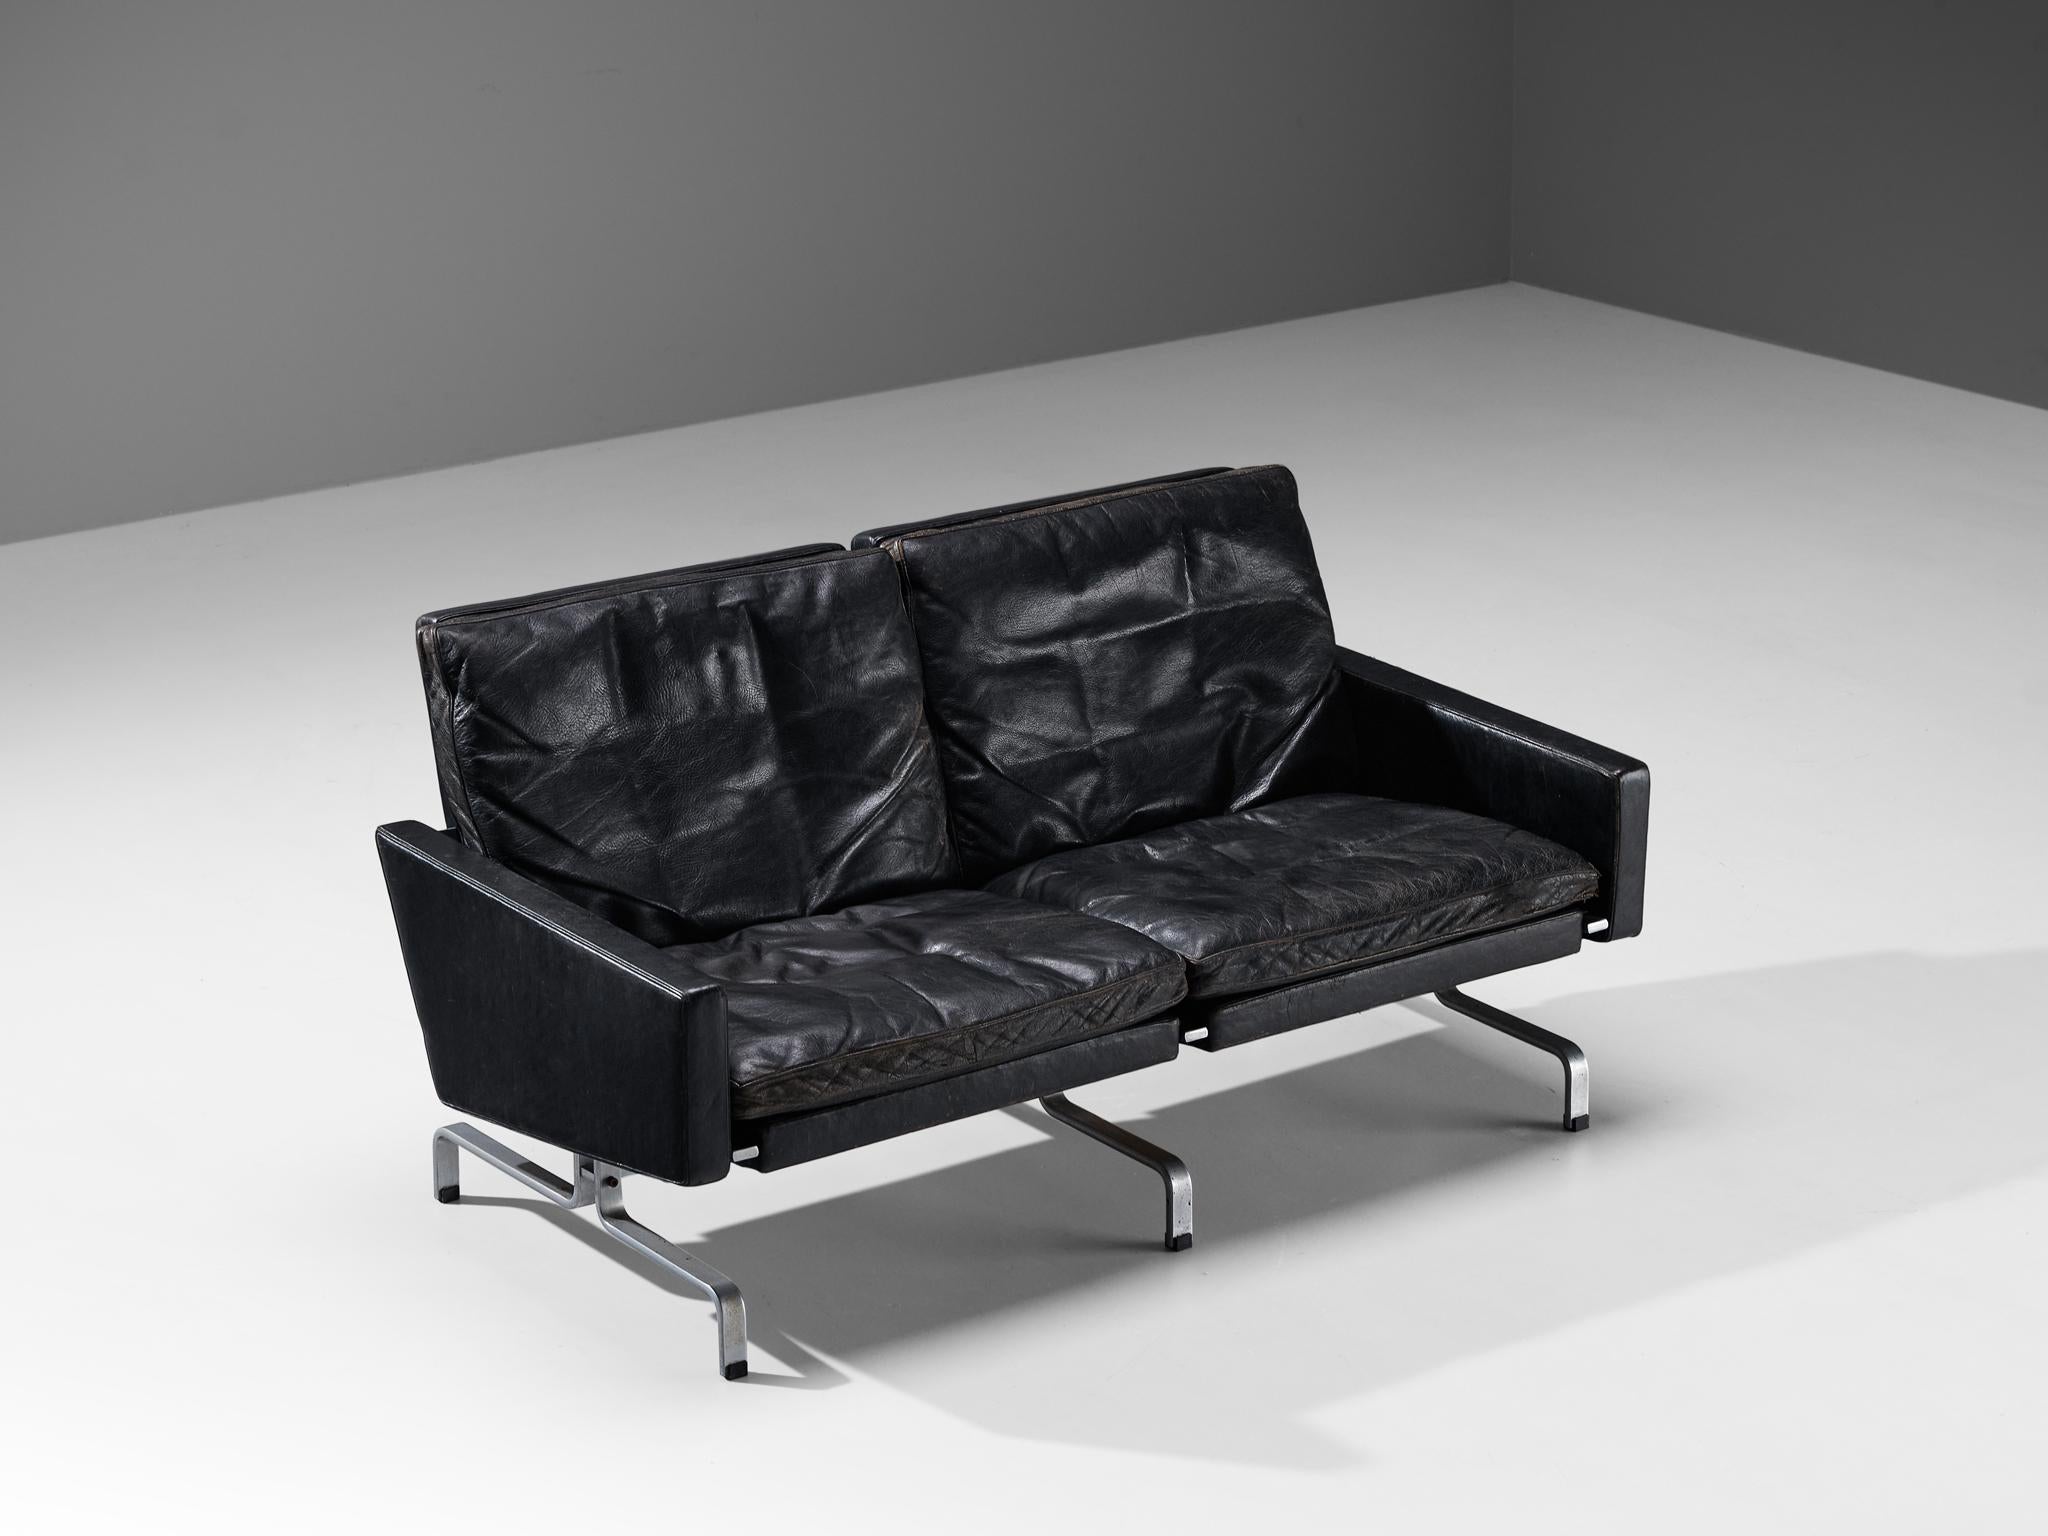 Poul Kjaerholm for E. Kold Christensen, three-seat sofa model PK 31, leather and metal, Denmark, 1958.

Beautiful PK31 sofa in patinated black leather by Poul Kjaerholm for E. Kold Christensen. This sofa features Poul Kjaerholm’s ability to work